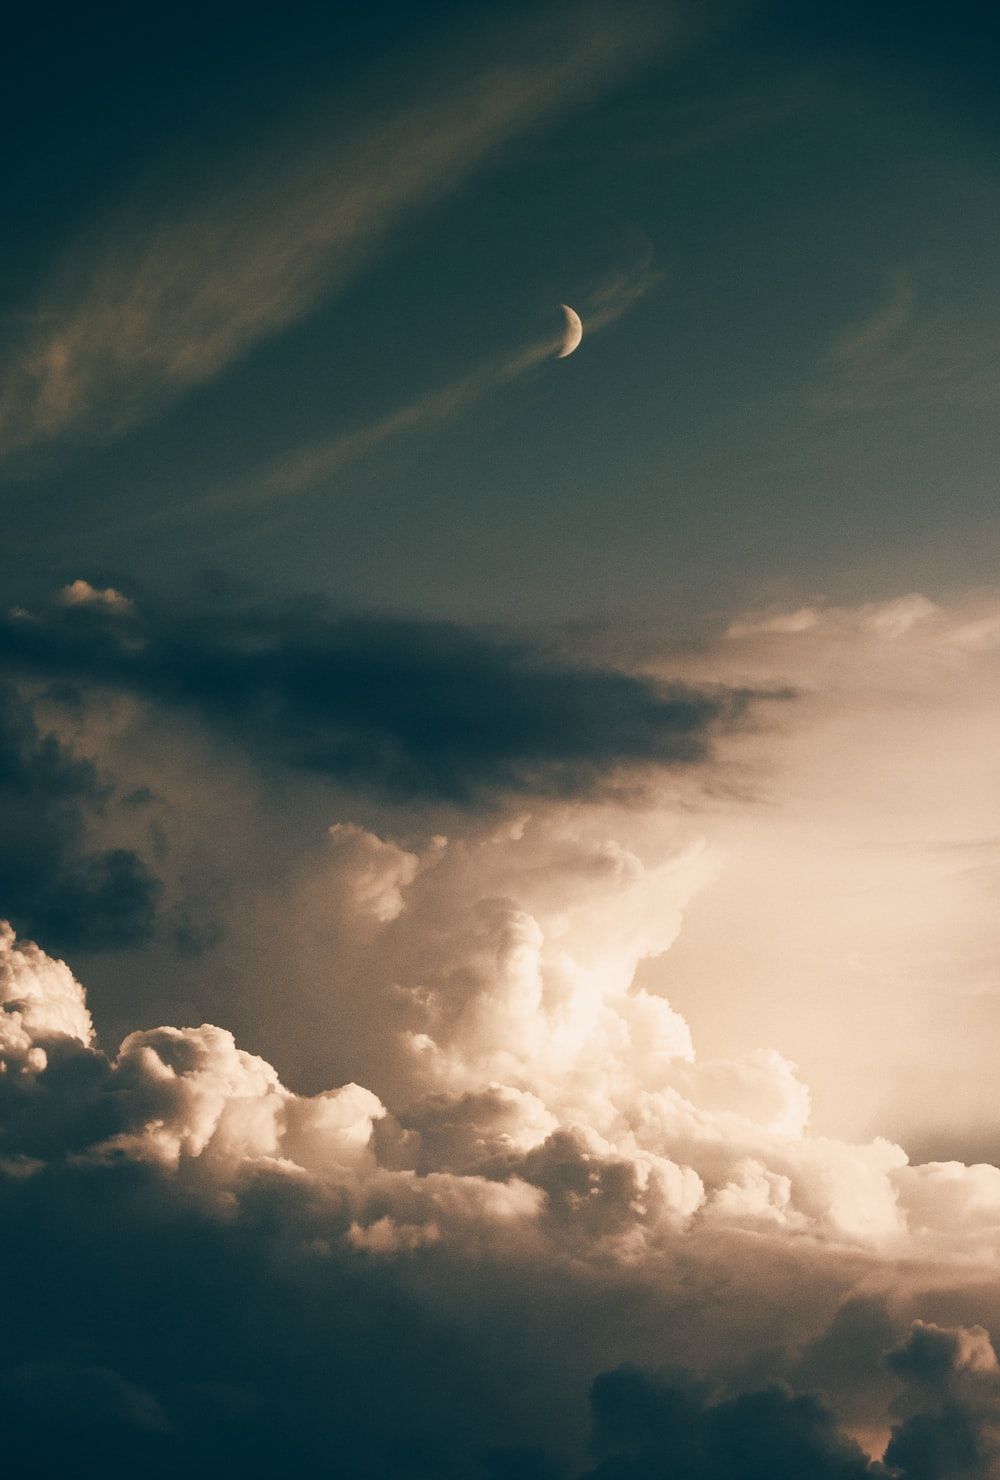 Moon In The Cloud Picture. Download Free Image